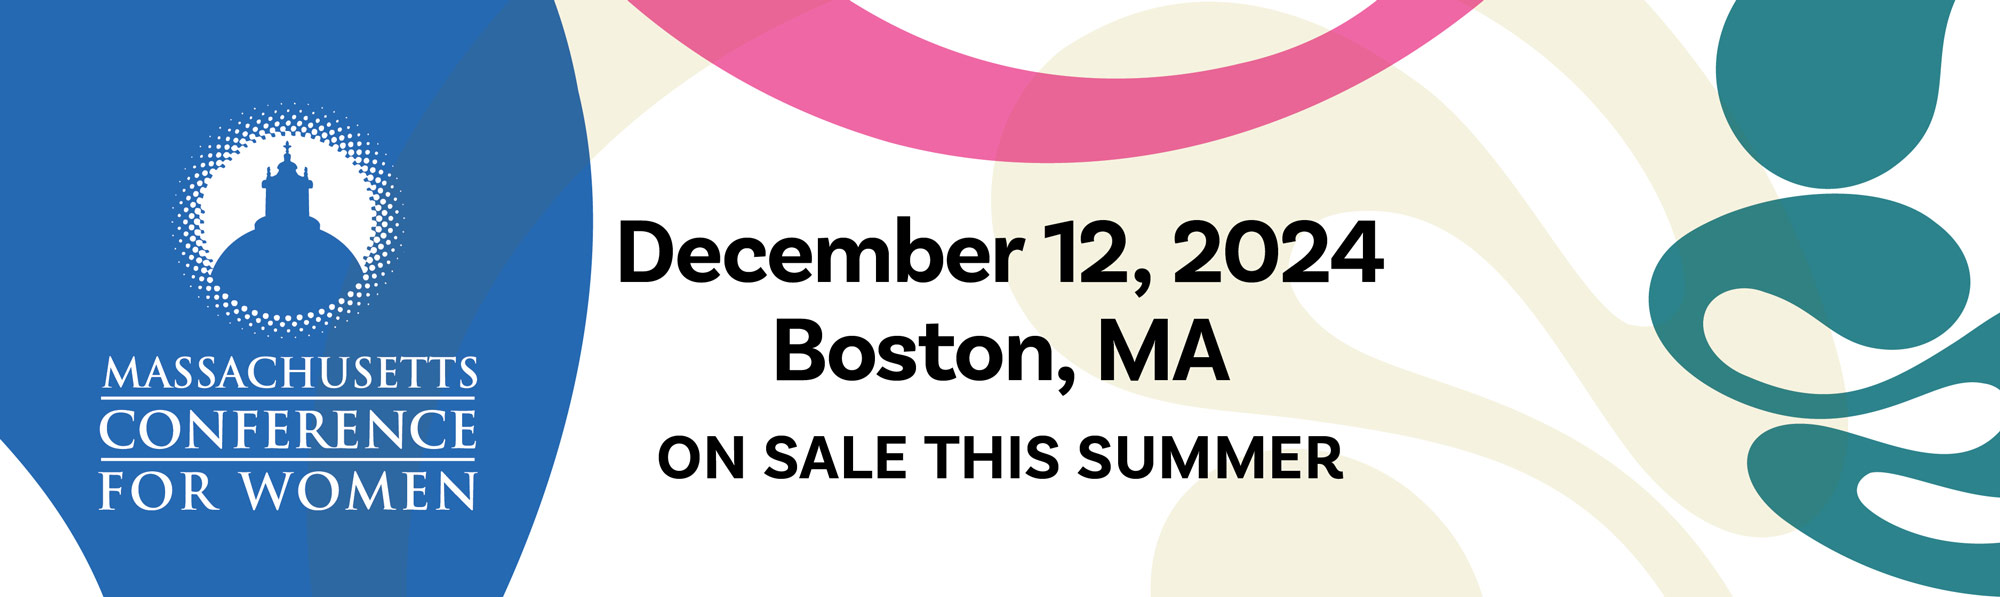 MA Conference for Women: December 12, 2024. Boston, MA. On sale this summer.